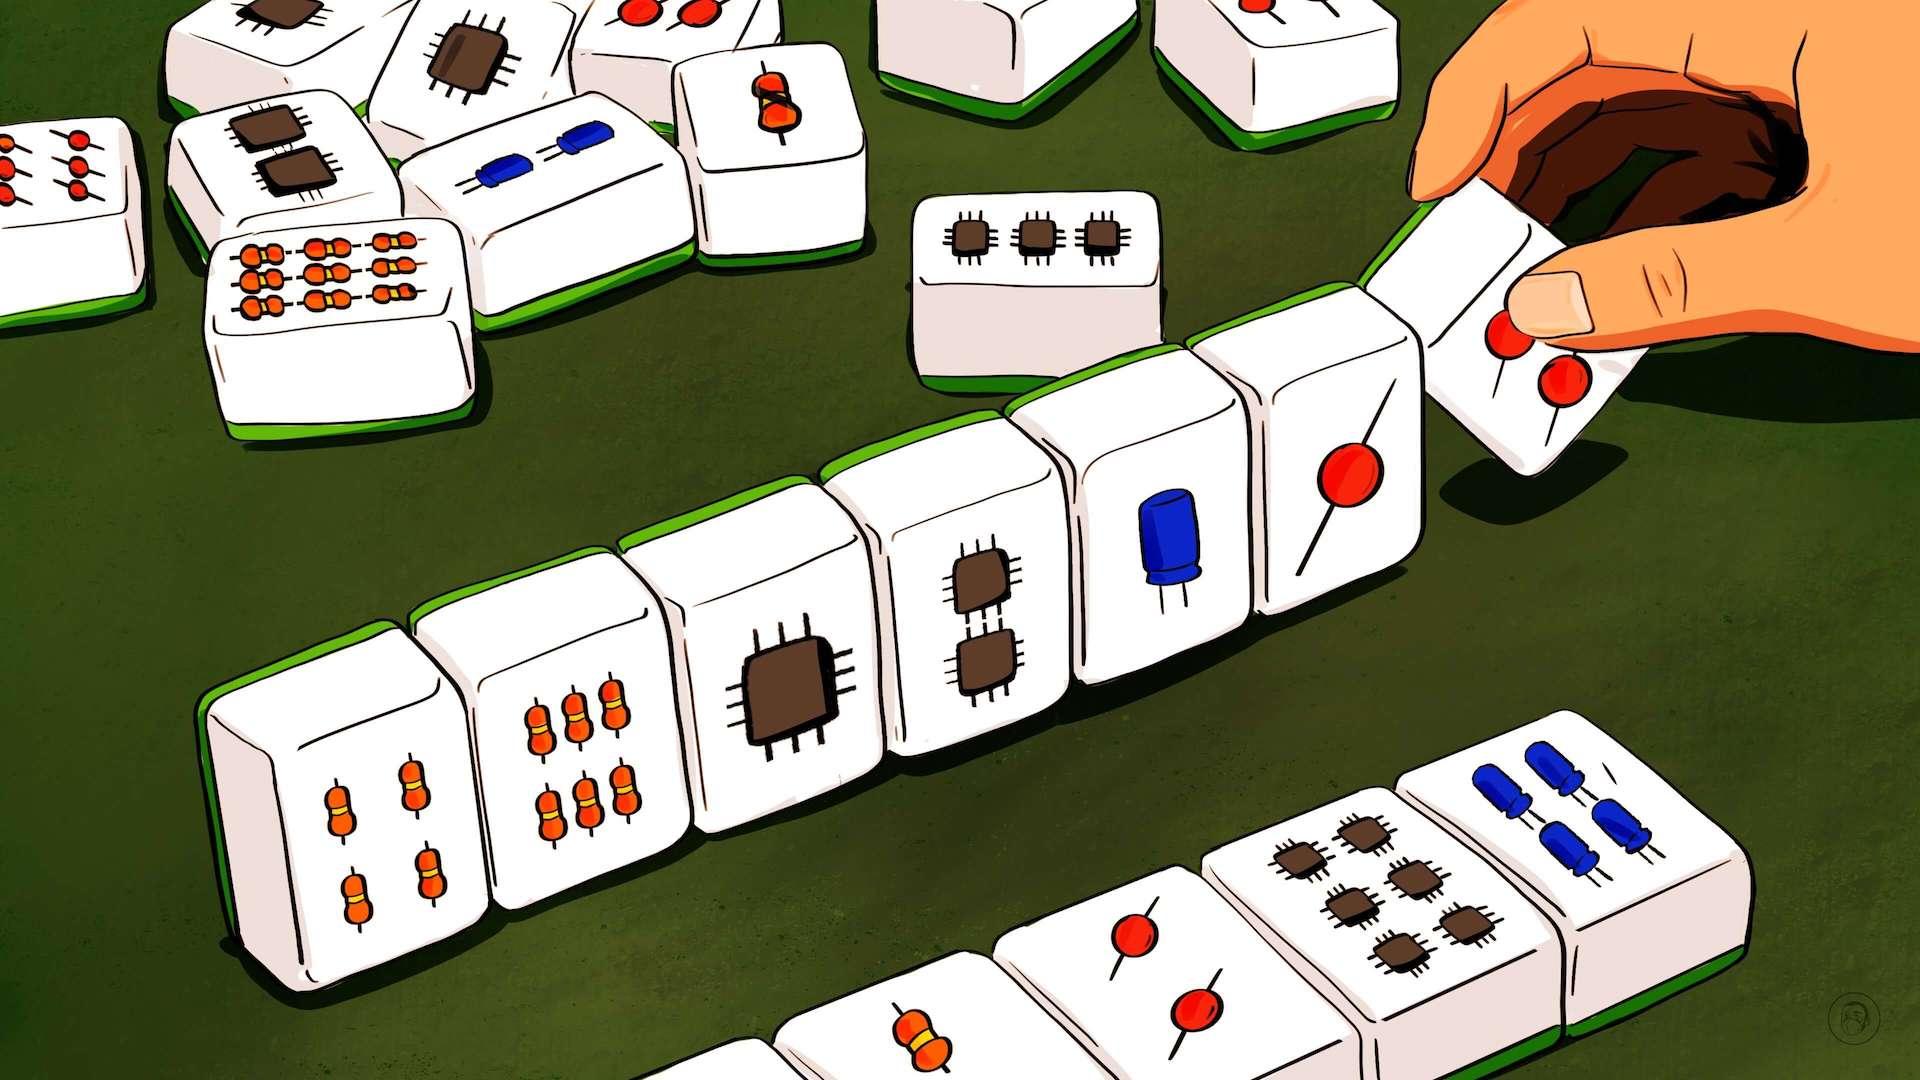 An illustration by Alex Santafe depicting a game of Mahjong with chipsets and electric components